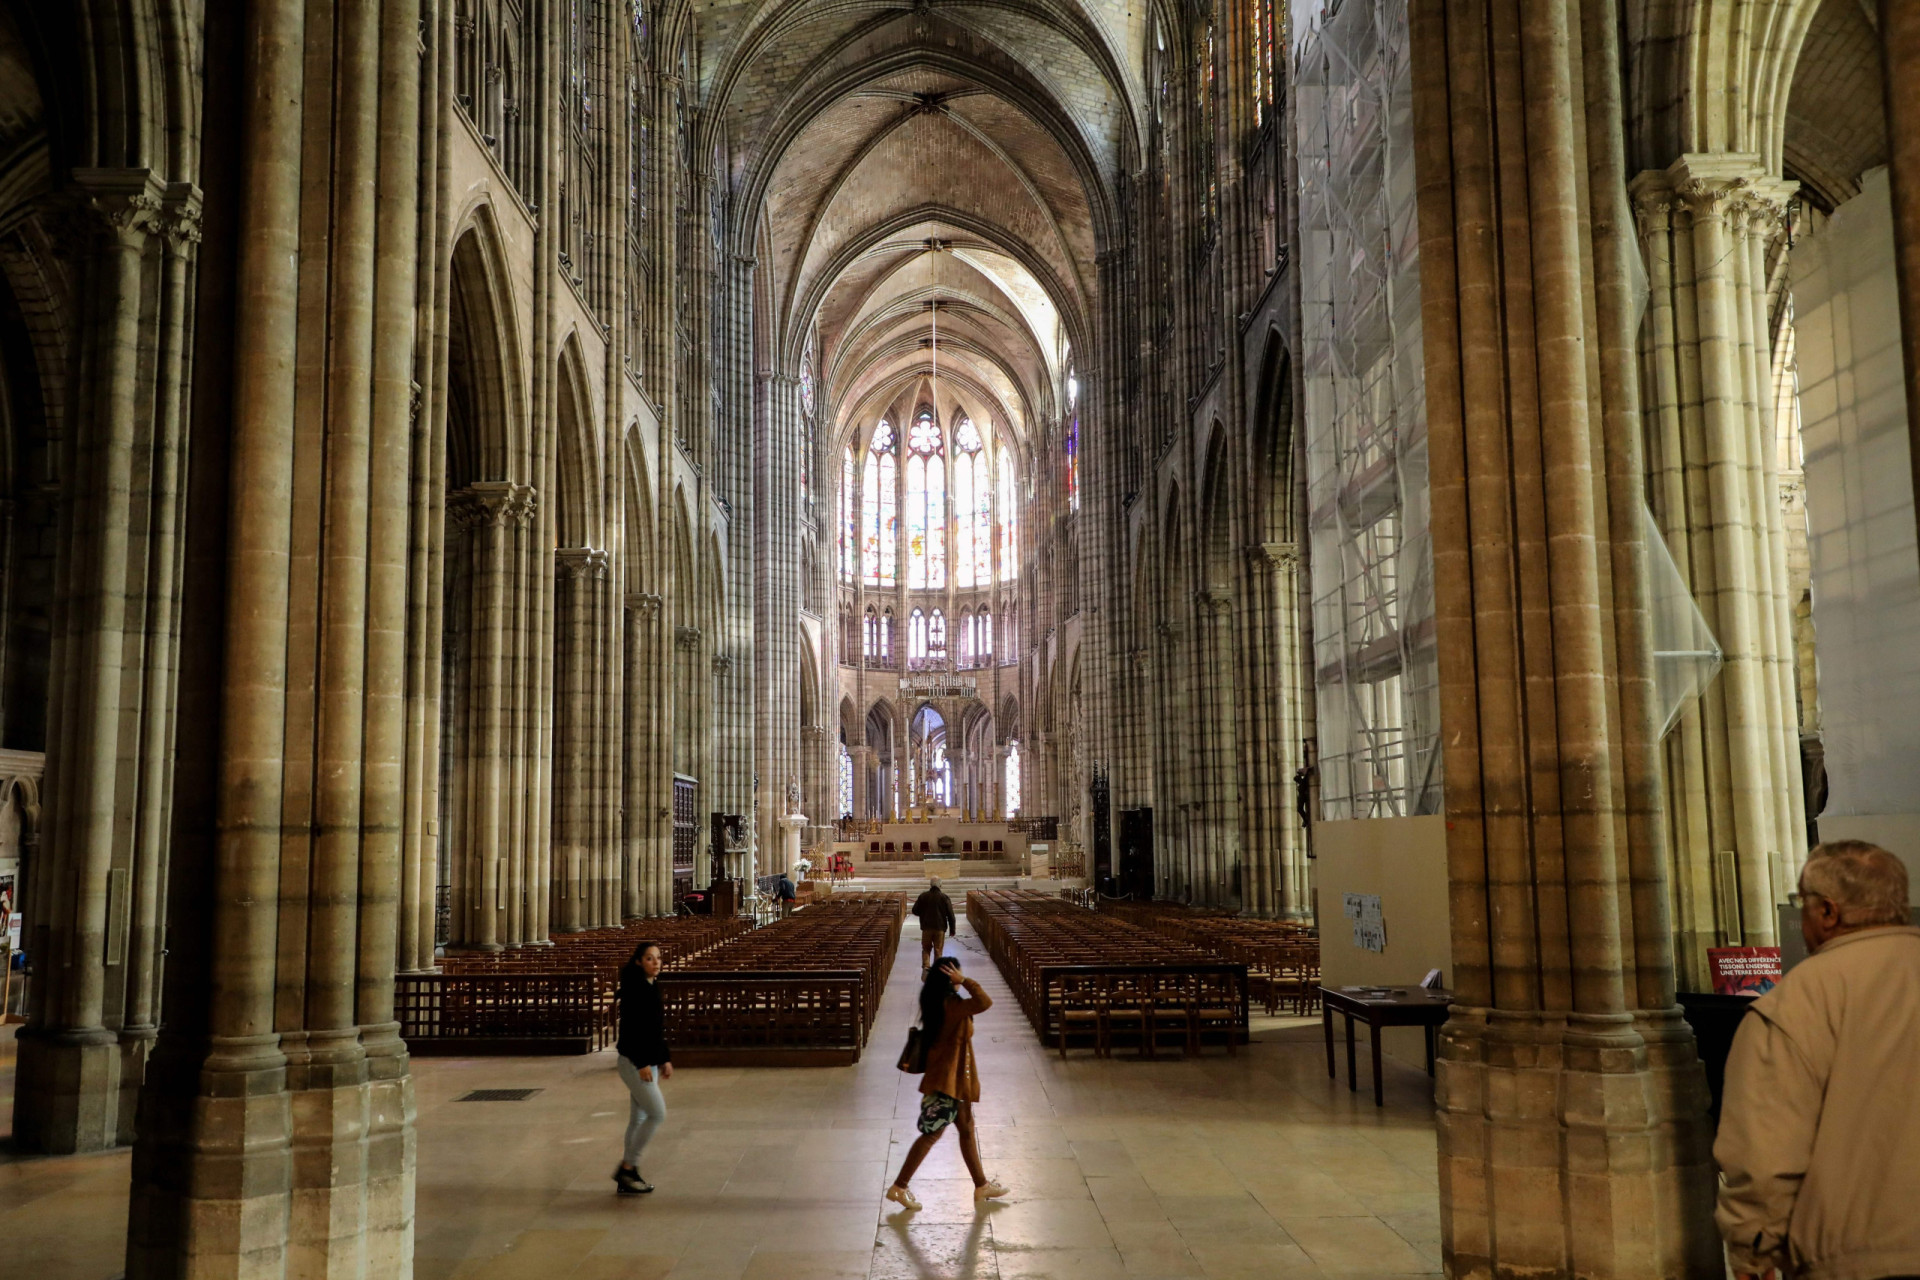 <p>This is one of the most sacred sites in France, as the cathedral was built on the exact spot where Saint-Denis is buried. Starting at Notre-Dame-des-Champs, pilgrims go through different related chapels and churches before ending at the basilica.</p><p><a href="https://www.msn.com/en-us/community/channel/vid-7xx8mnucu55yw63we9va2gwr7uihbxwc68fxqp25x6tg4ftibpra?cvid=94631541bc0f4f89bfd59158d696ad7e">Follow us and access great exclusive content every day</a></p>